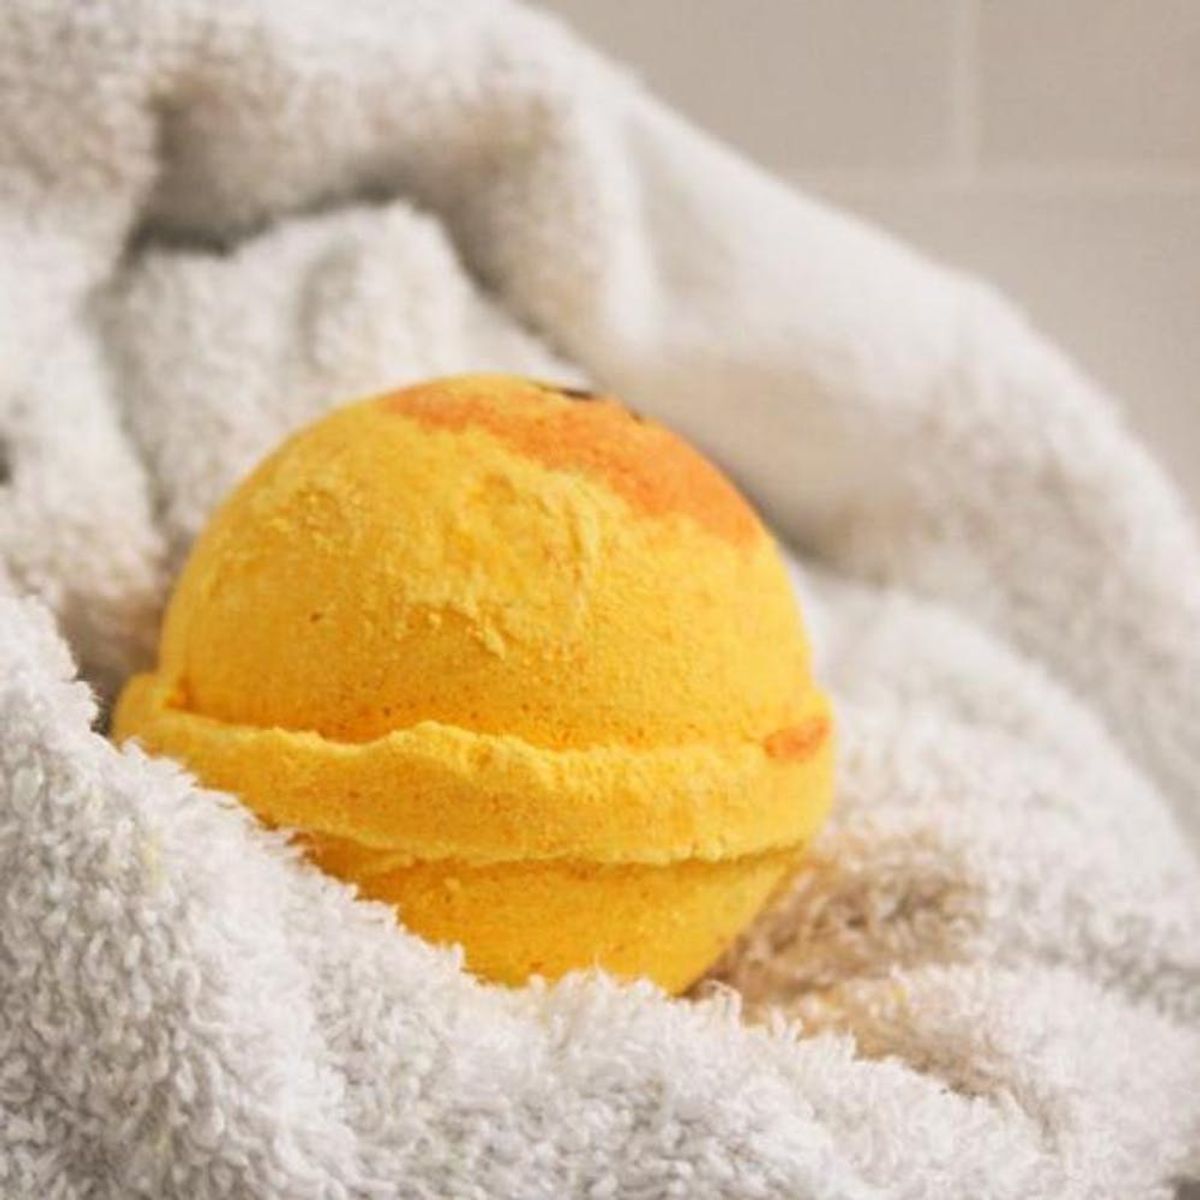 Pumpkin Spice Bath Bombs Are Here to Get You Ready for Fall